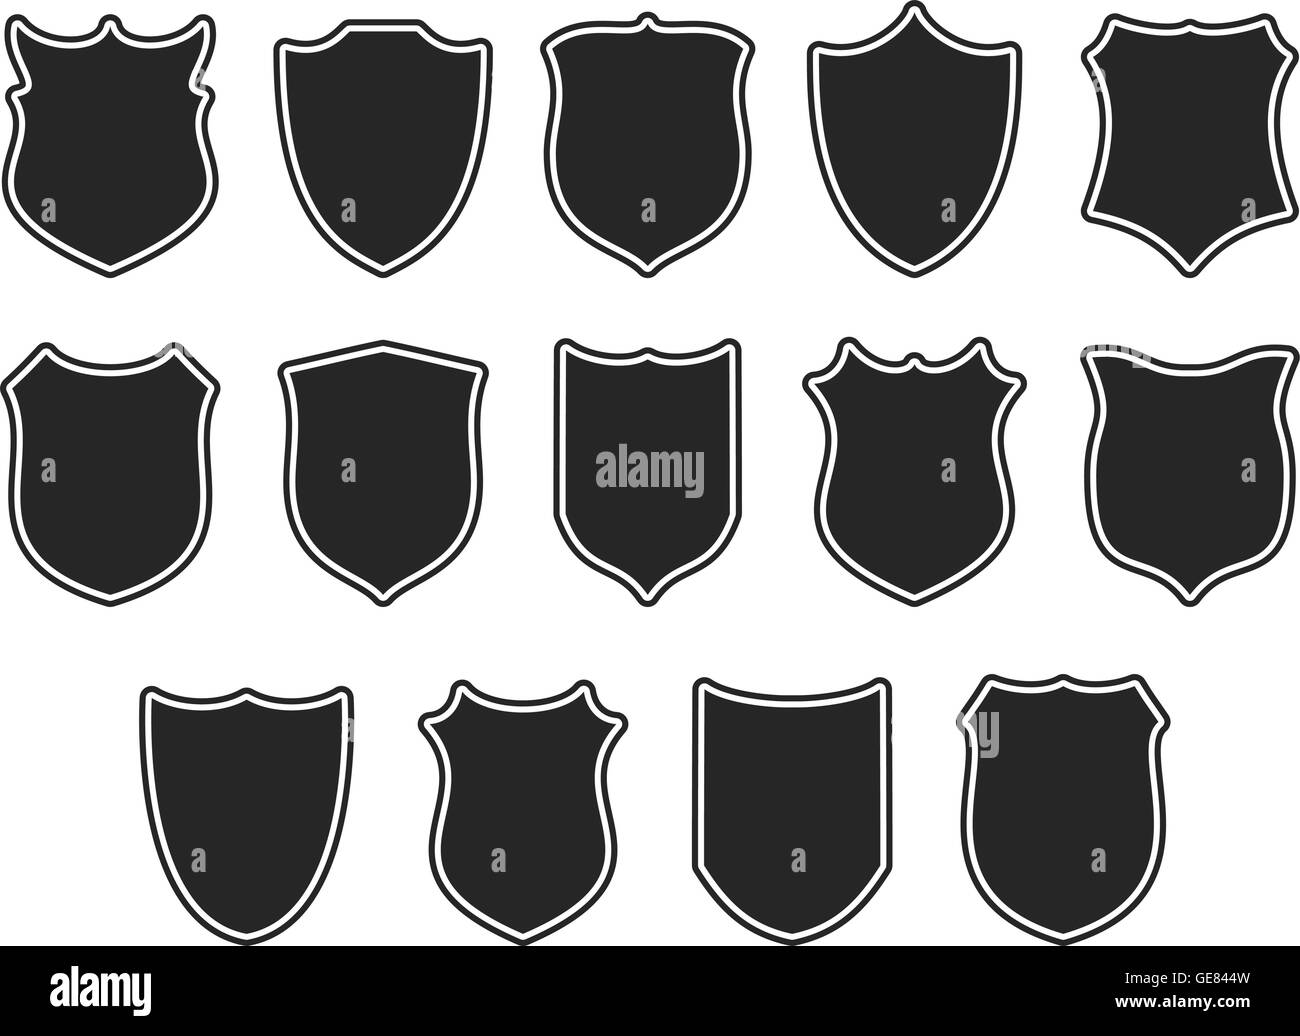 Set of shields isolated on white Stock Vector